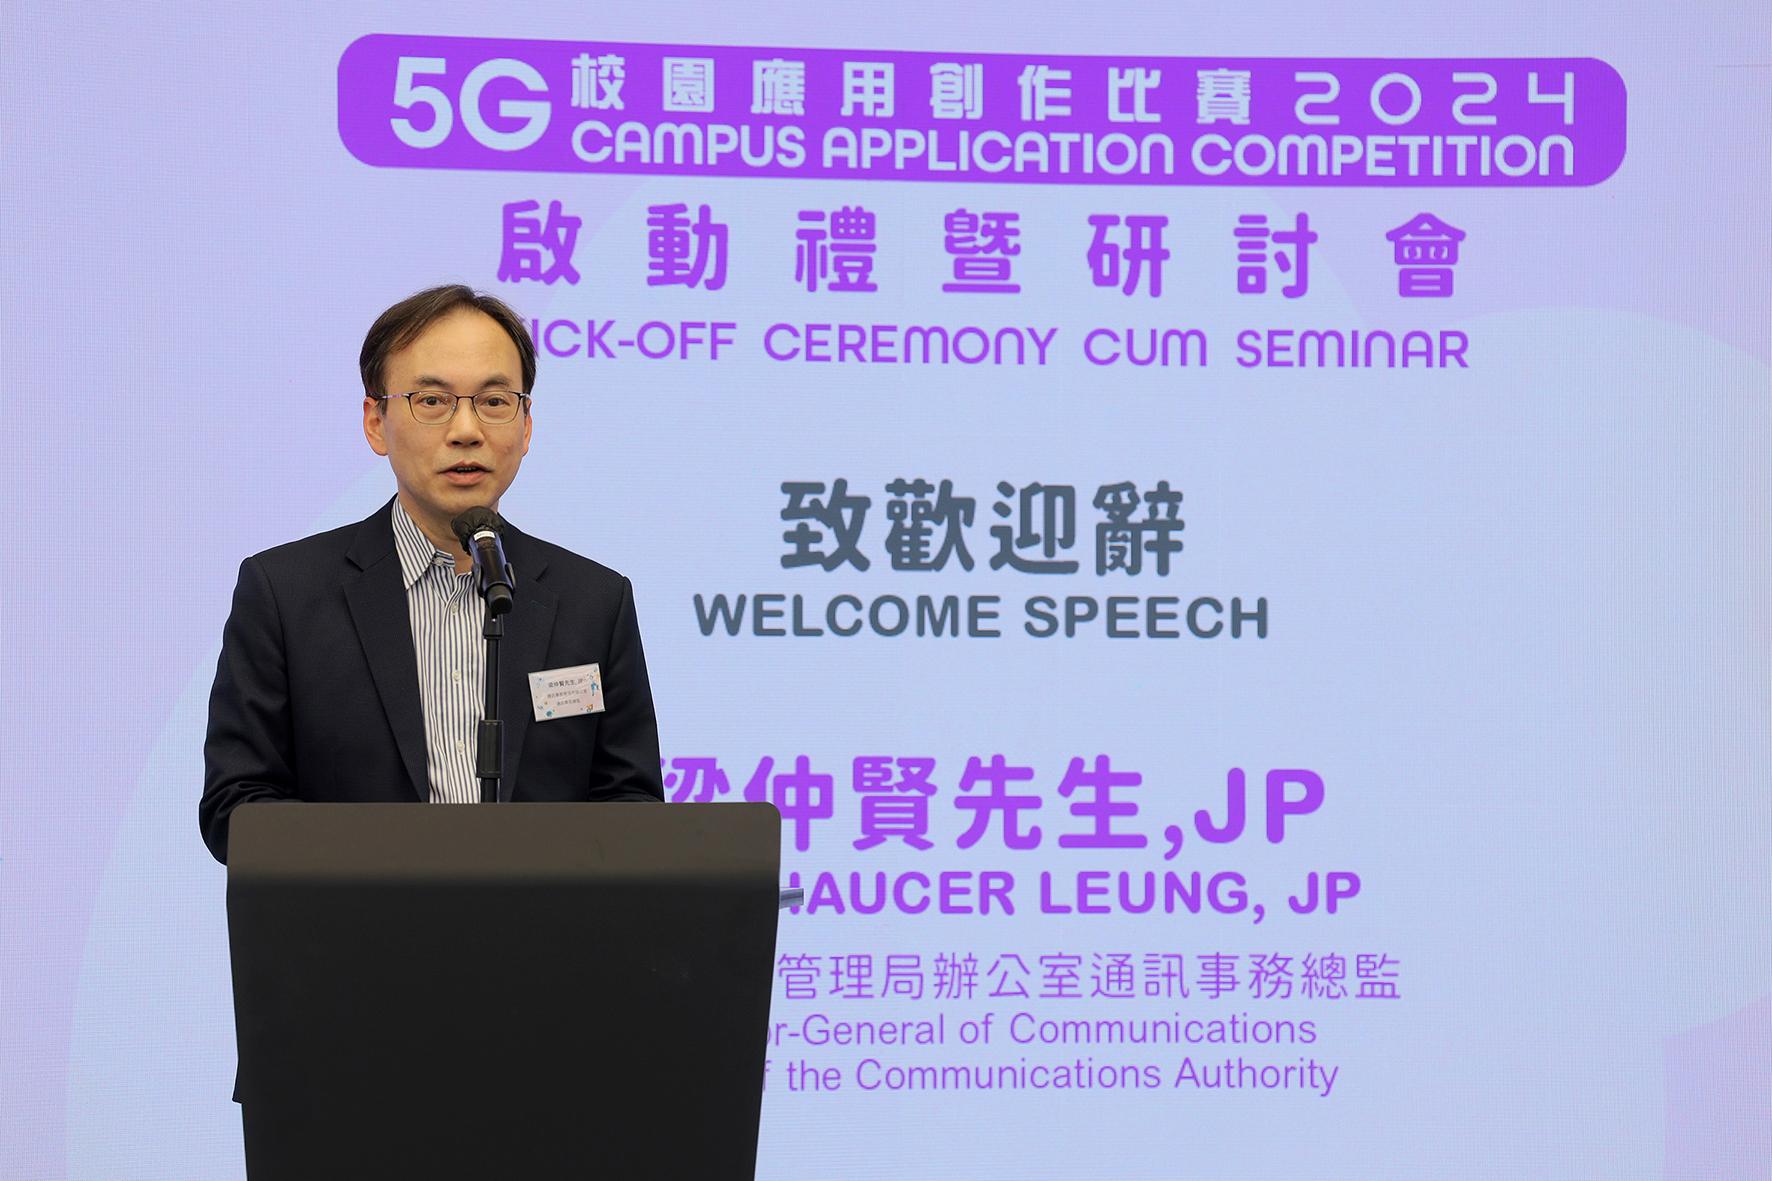 The Director-General of Communications, Mr Chaucer Leung, delivers opening remarks at the Kick-off Ceremony cum Seminar of the second 5G Campus Application Competition today (May 18).